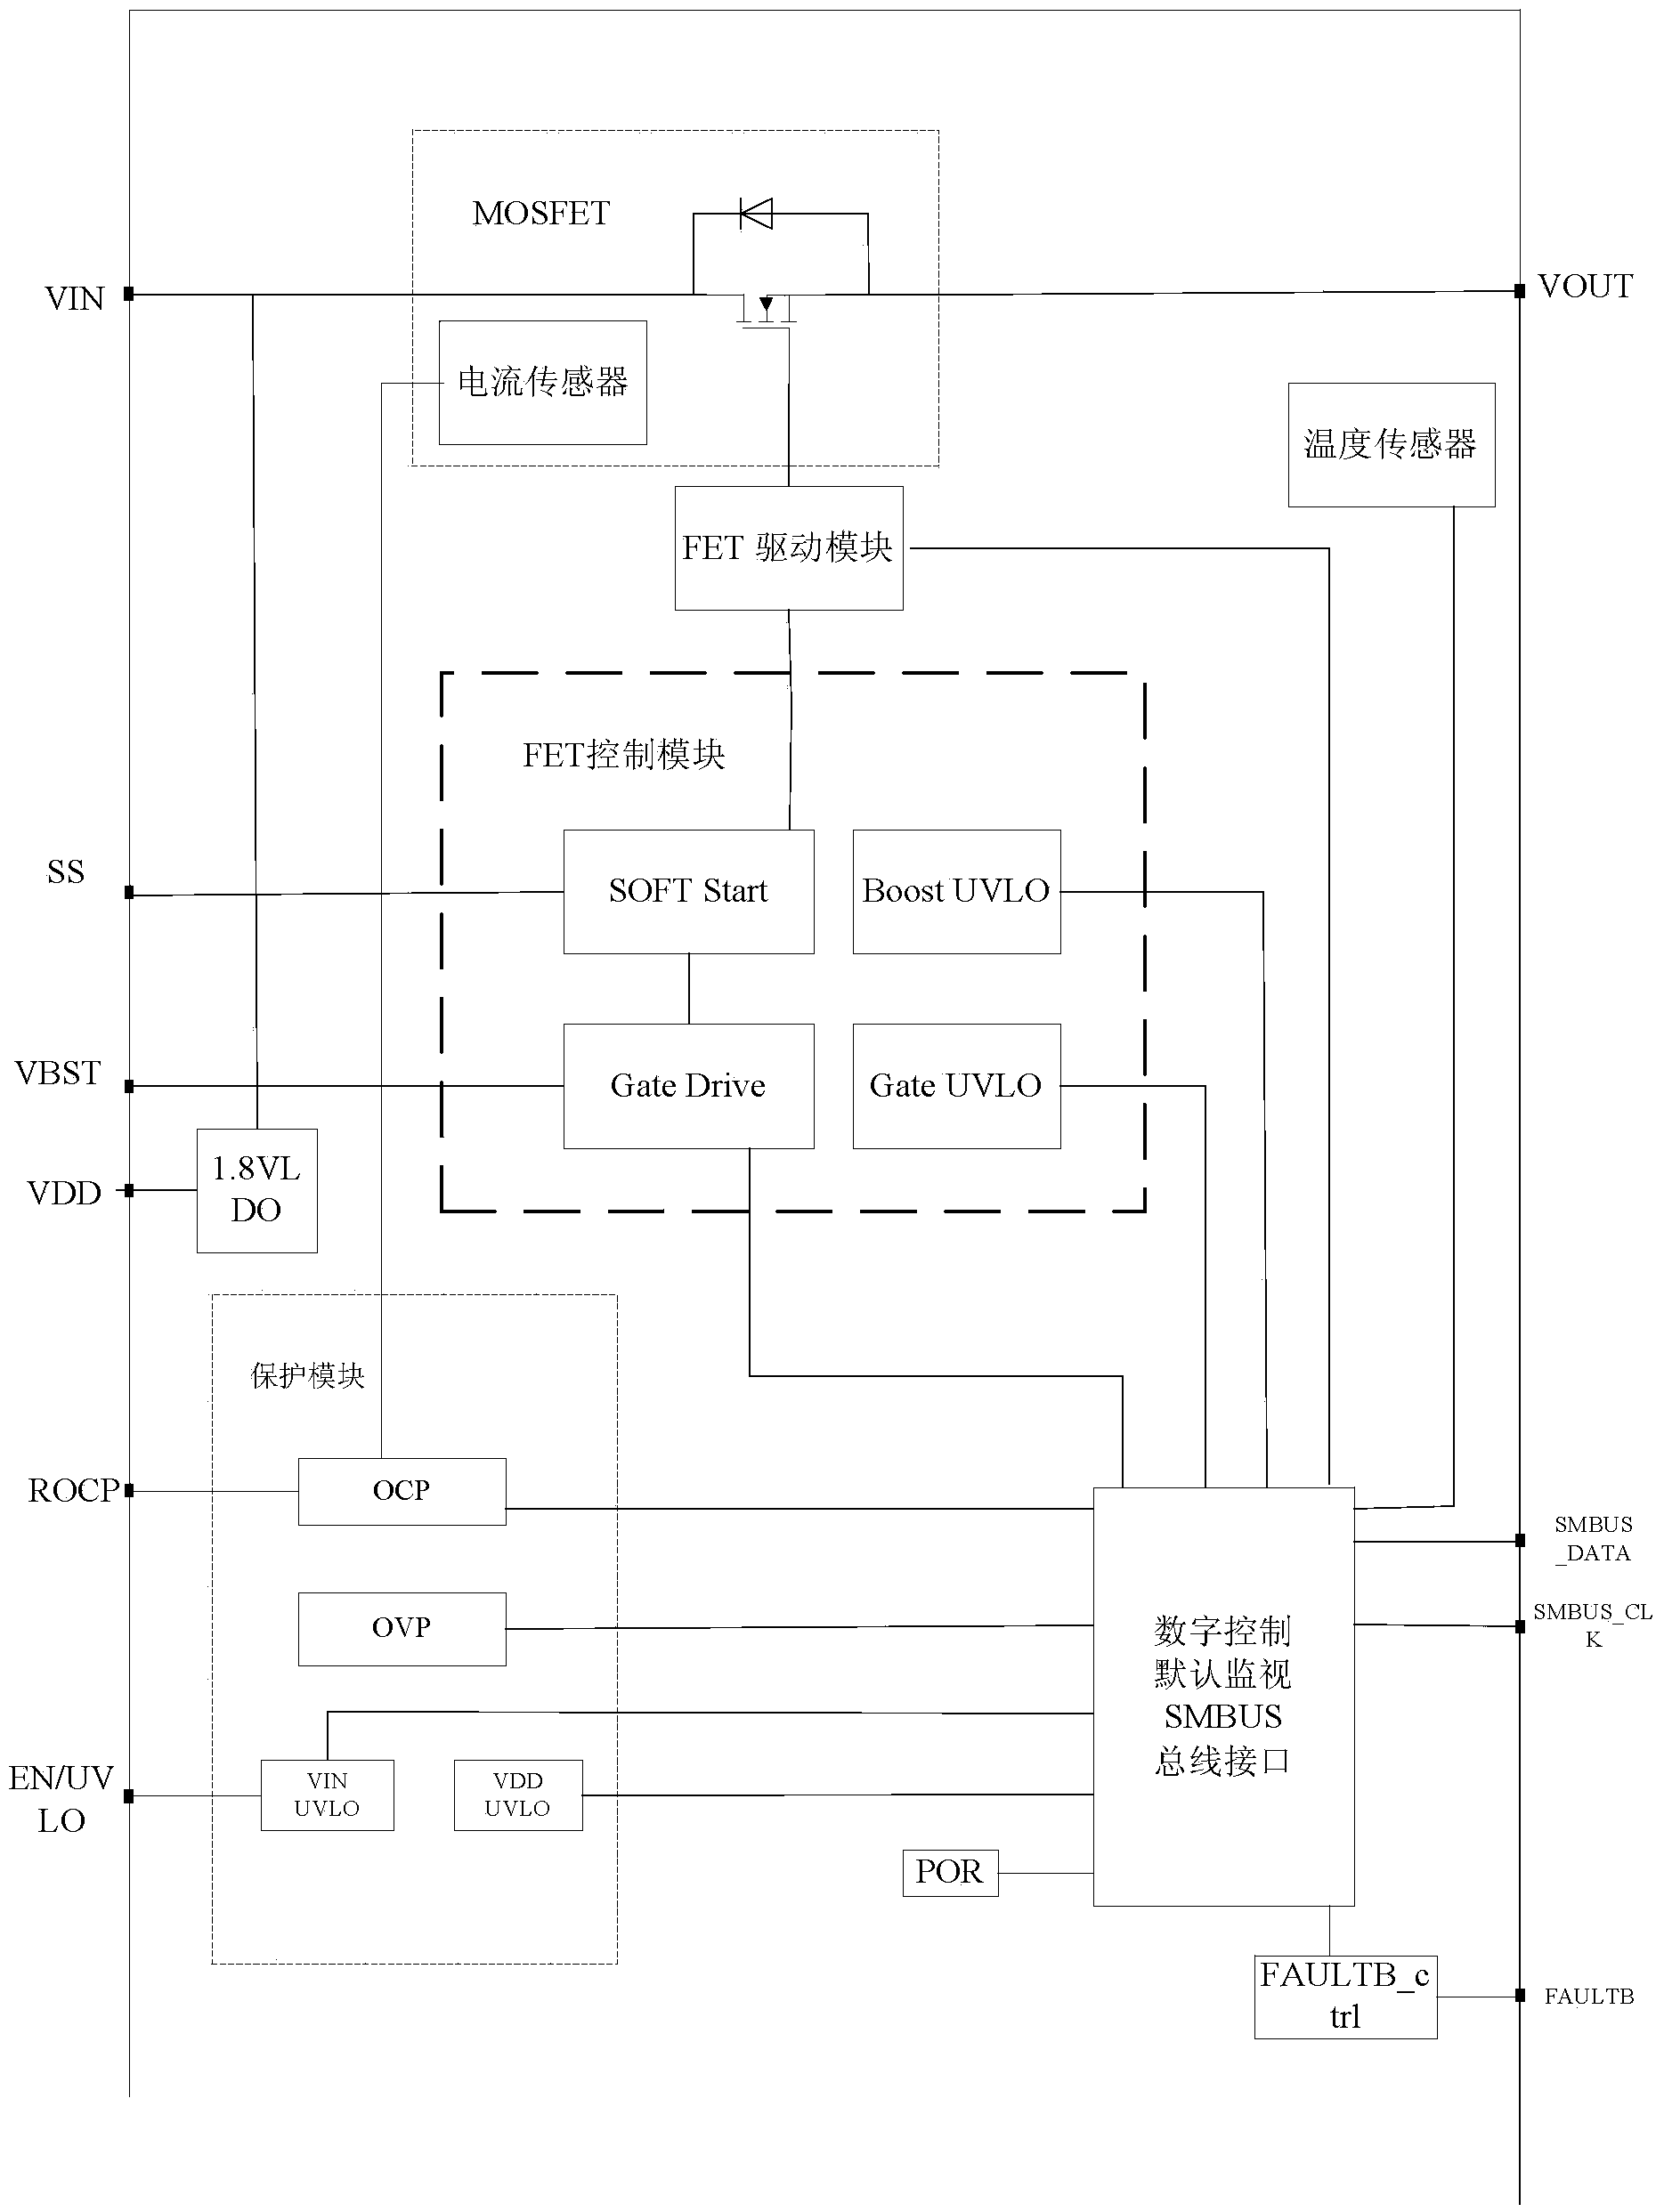 Hot swap protection circuit system